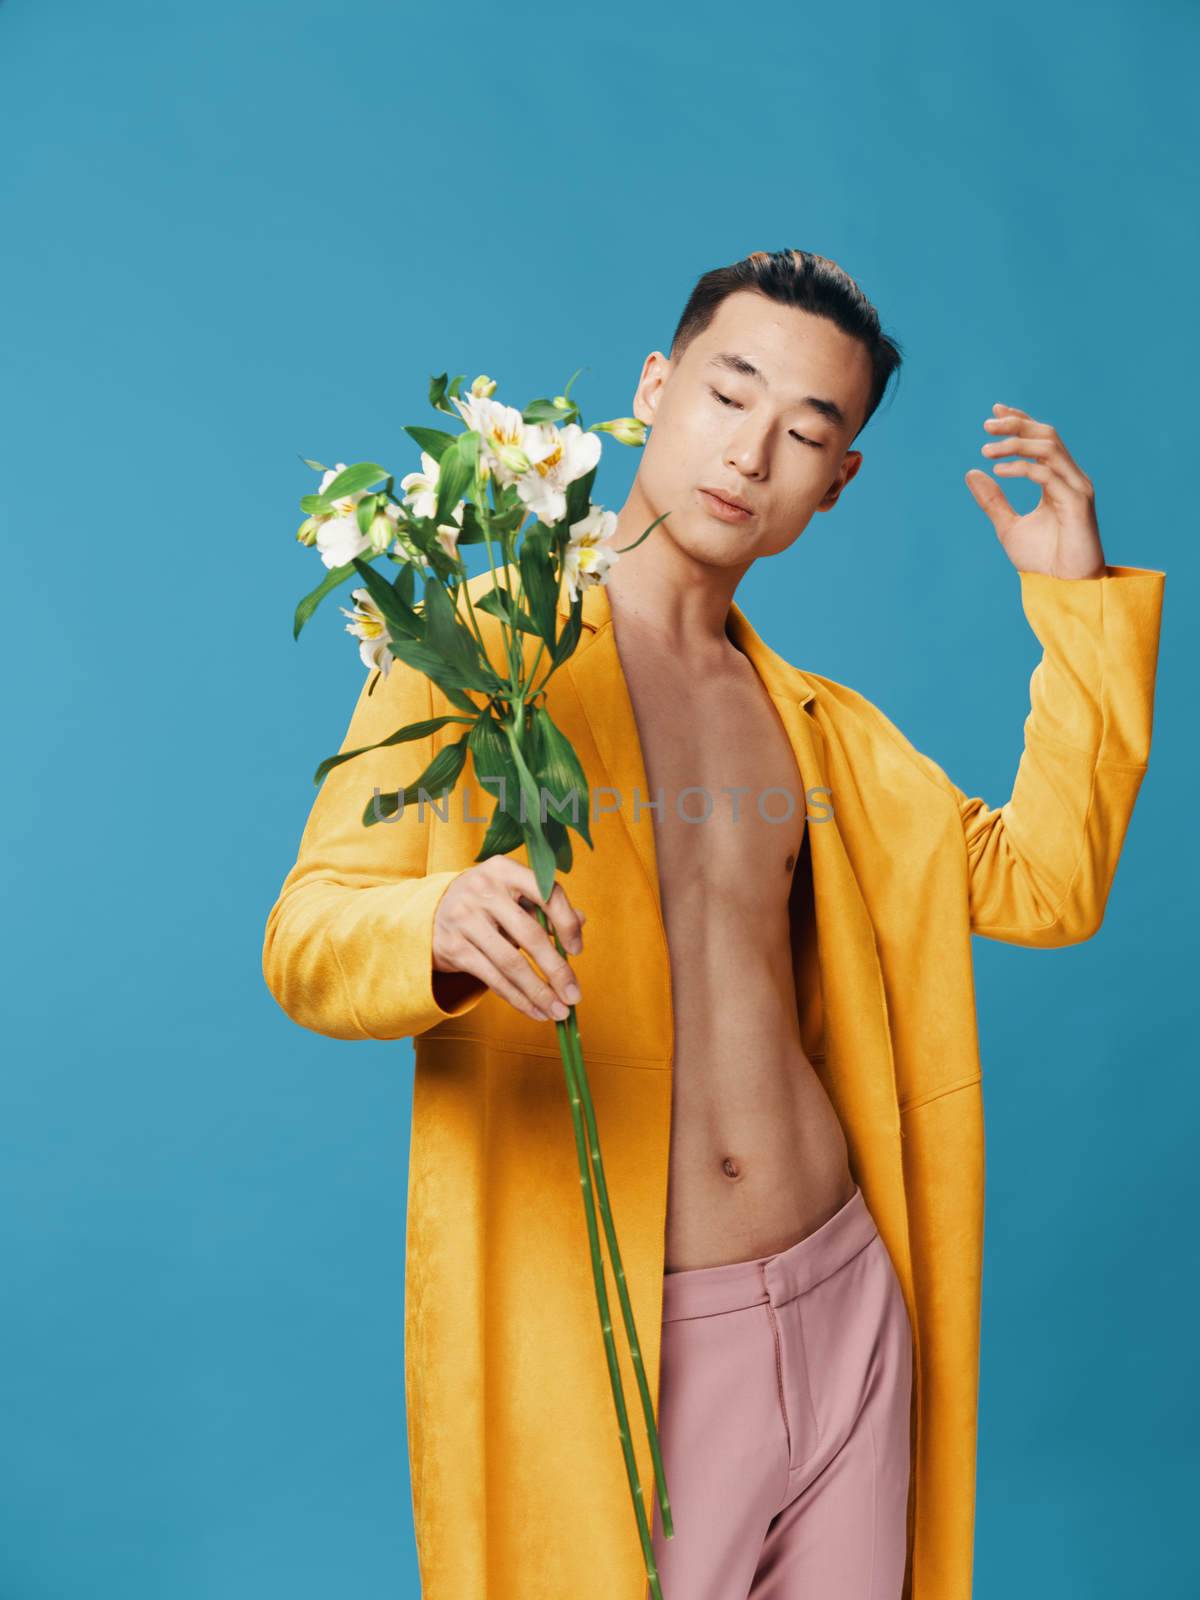 Asian man bouquet of white flowers yellow coat blue background Copy Space. High quality photo